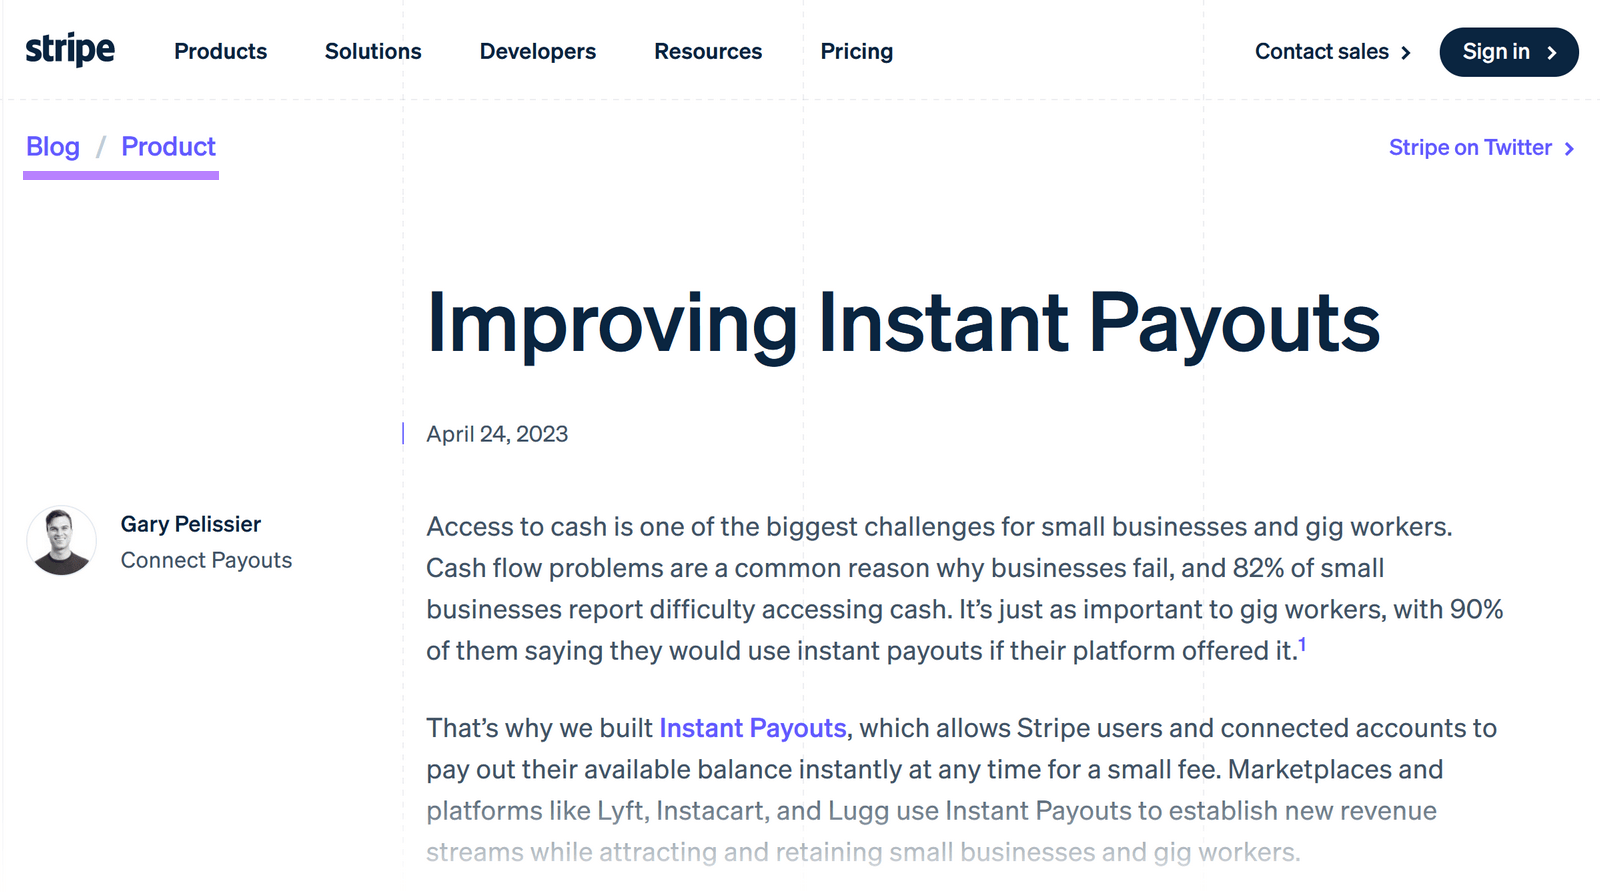 Stripe's product news article on improving instant payouts.